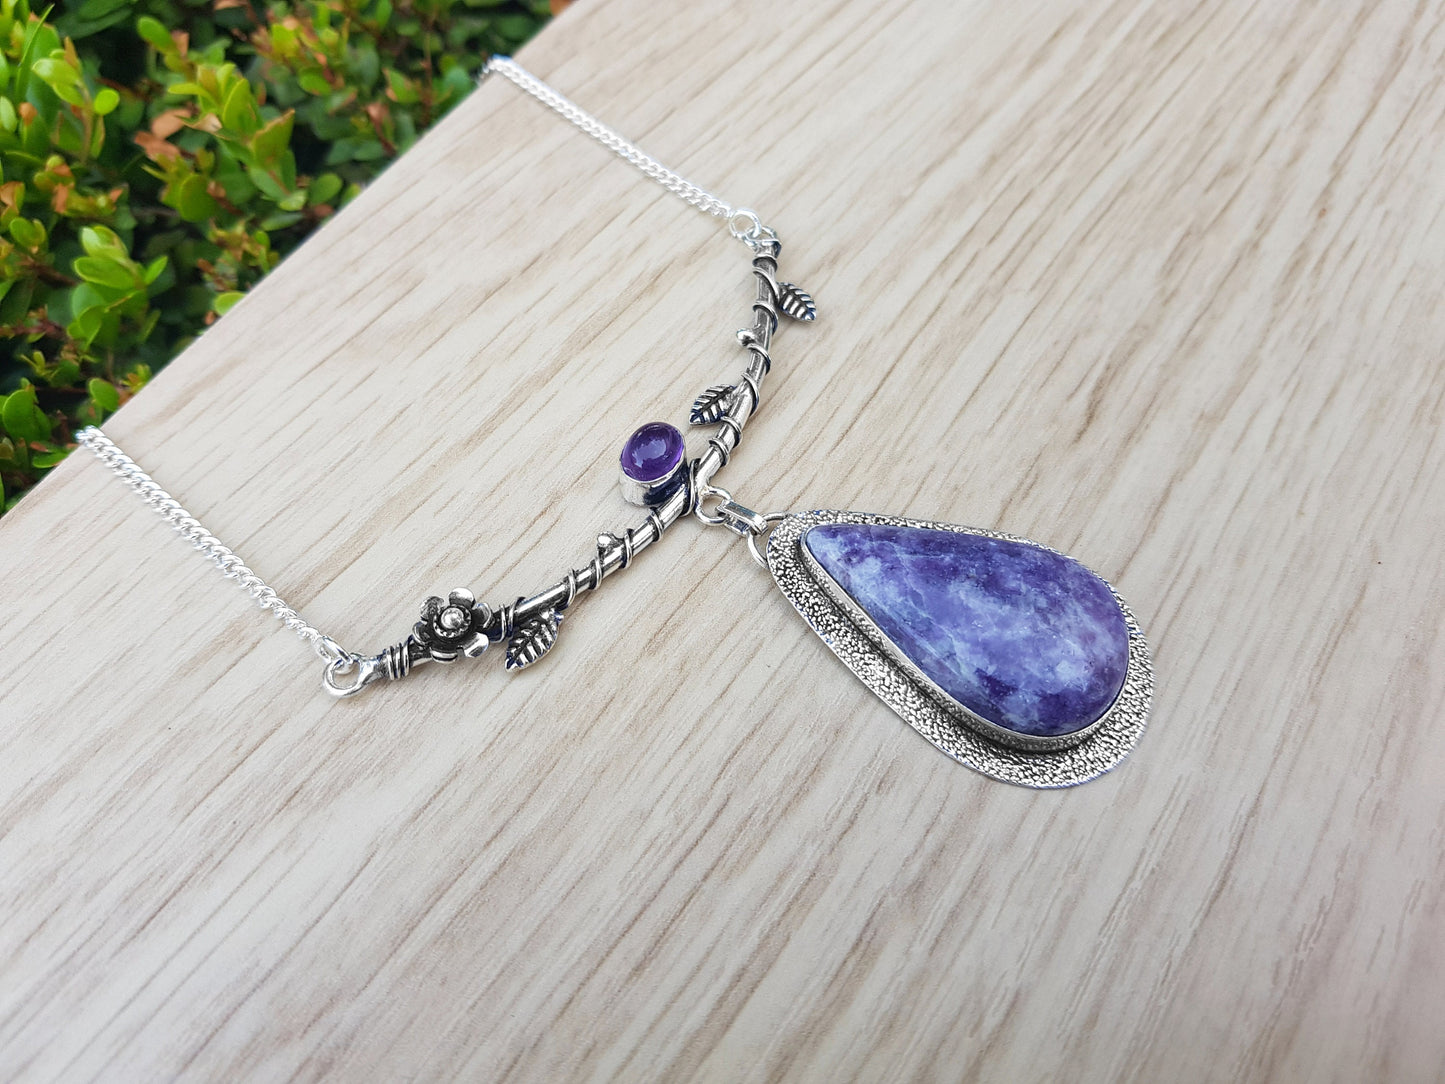 Charoite And Amethyst Necklace Tree Statement Necklace In Sterling Silver